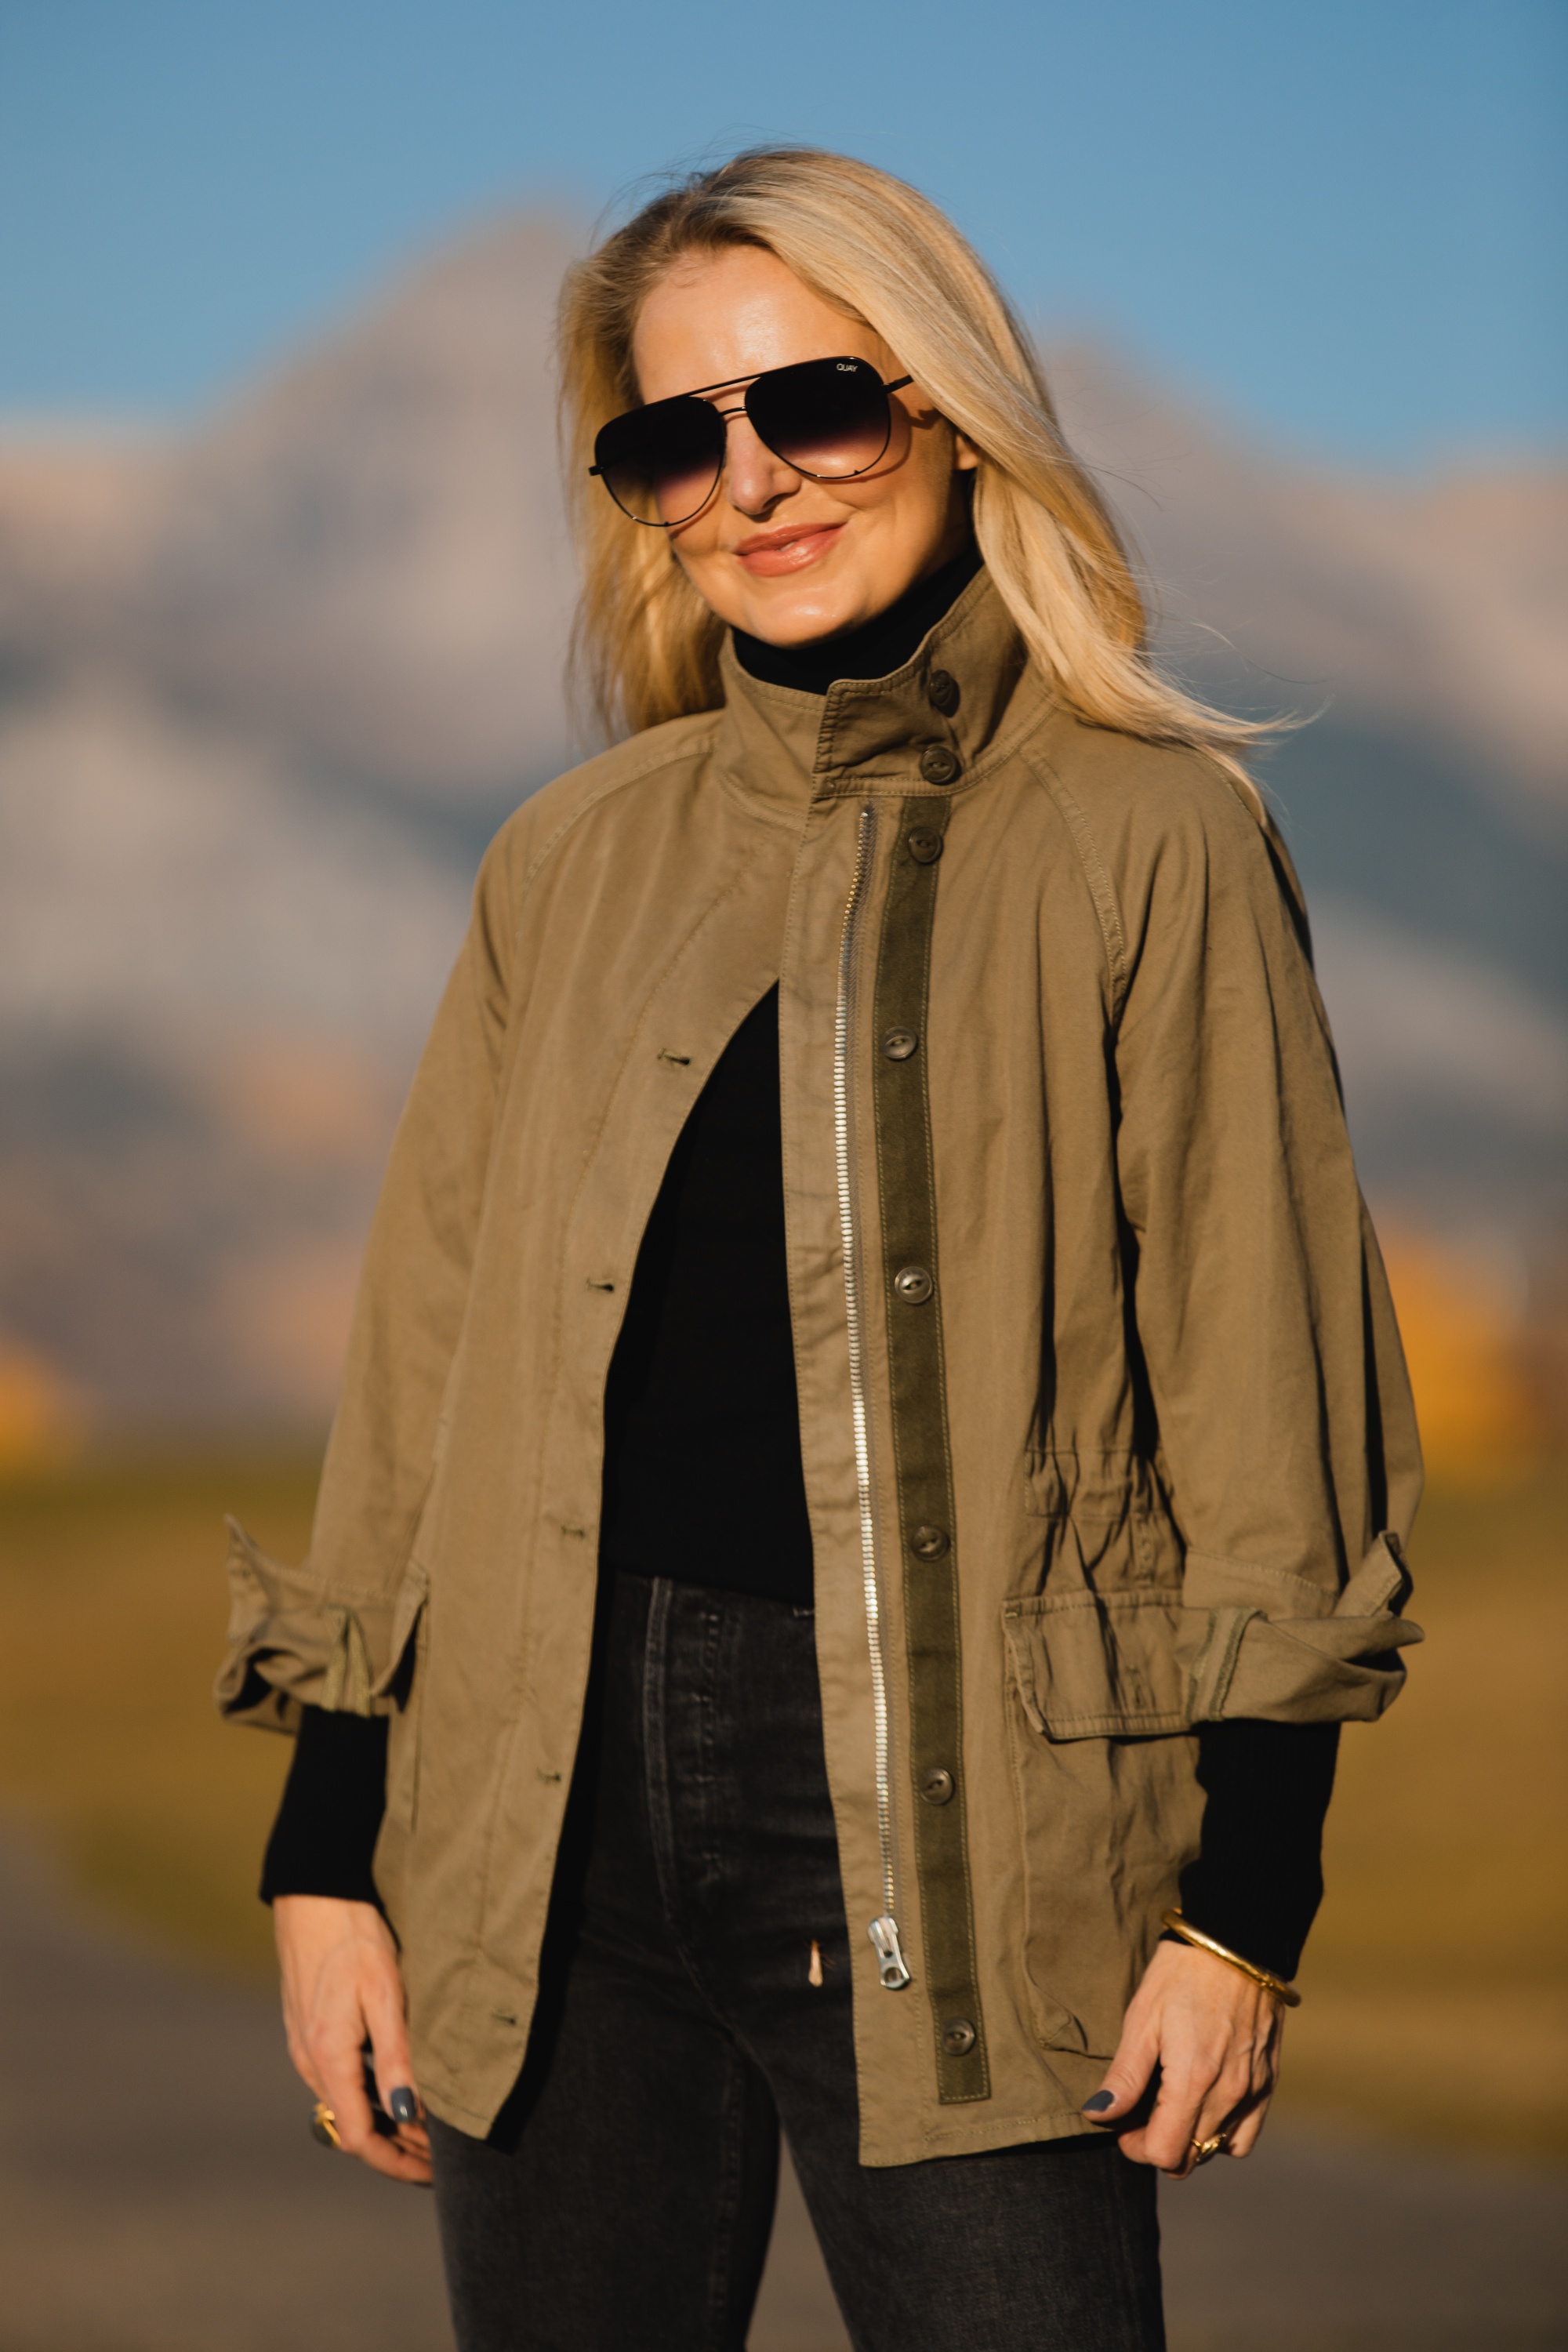 How To Wear A Cargo Jacket, Erin Busbee of Busbee Style wearing a green cargo jacket by rag & bone, black turtleneck puff sleeve cashmere sweater by Aqua, gray wash Nico slim fit jeans by Agolde, QUAY sunglasses, and Alexander Wang cutout booties in Telluride, Colorado